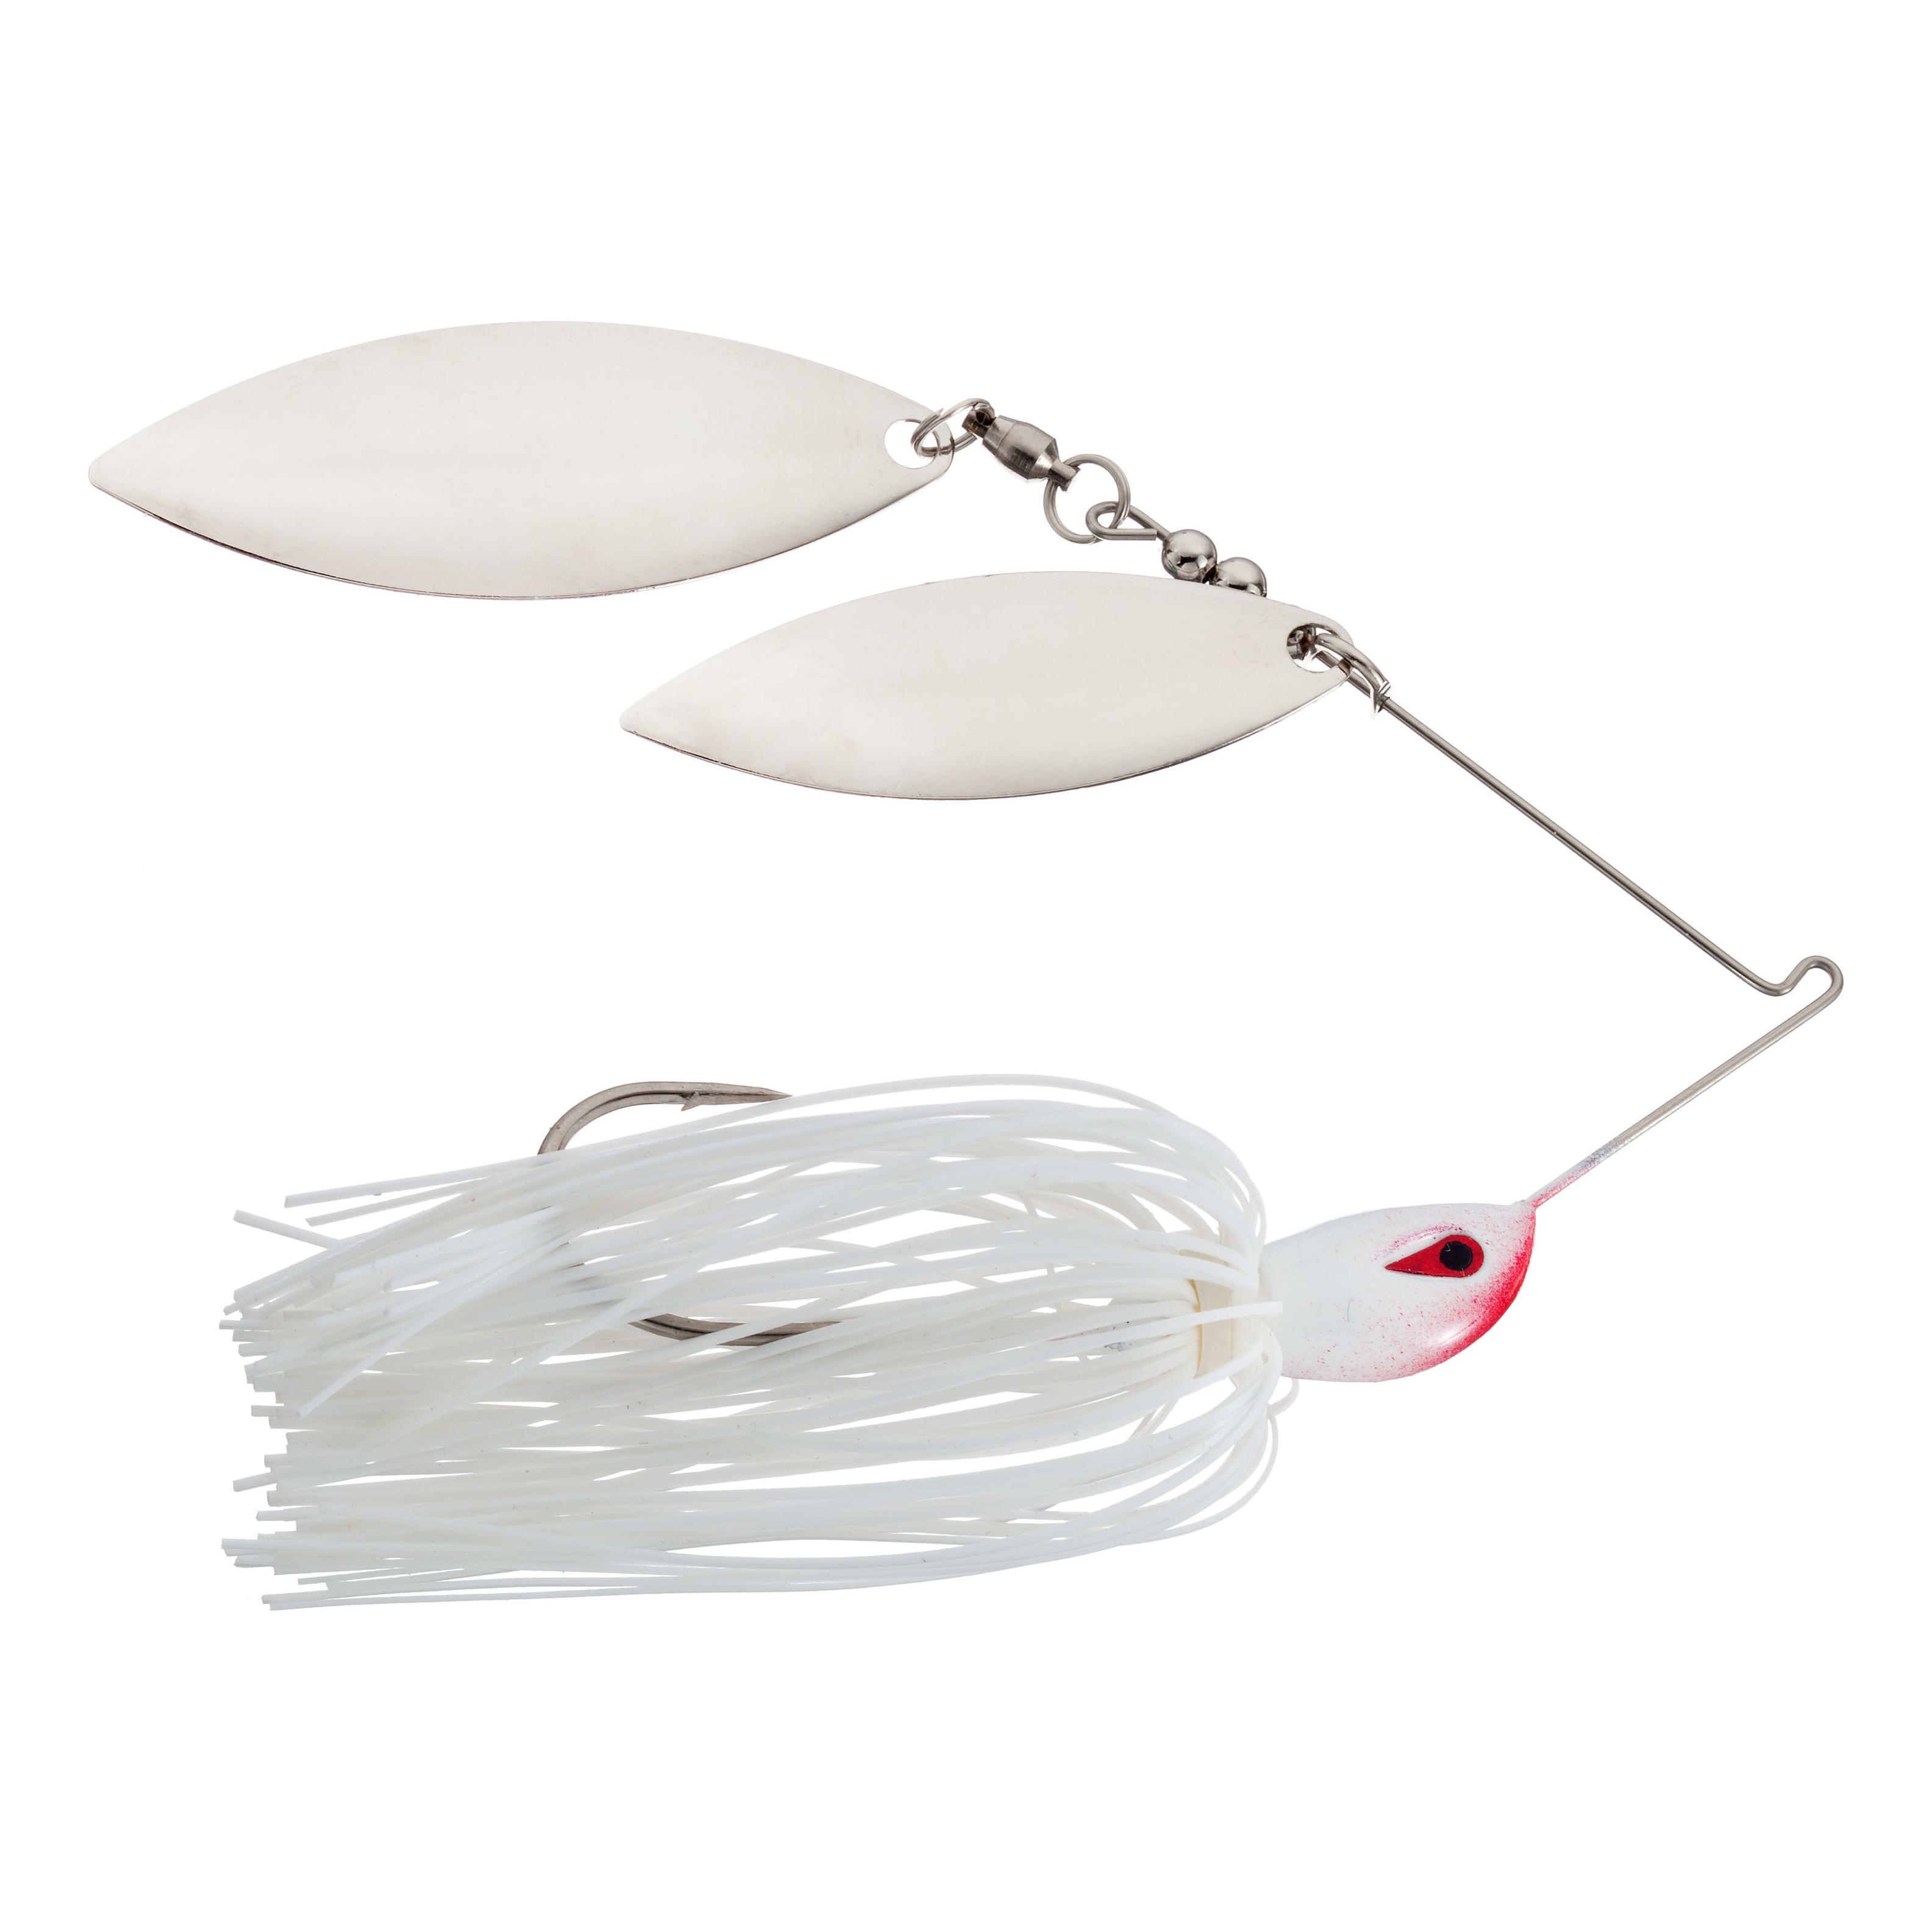 Glamour Shad 1/4 oz. Double Willow Spinnerbait — Glamour Shad Store